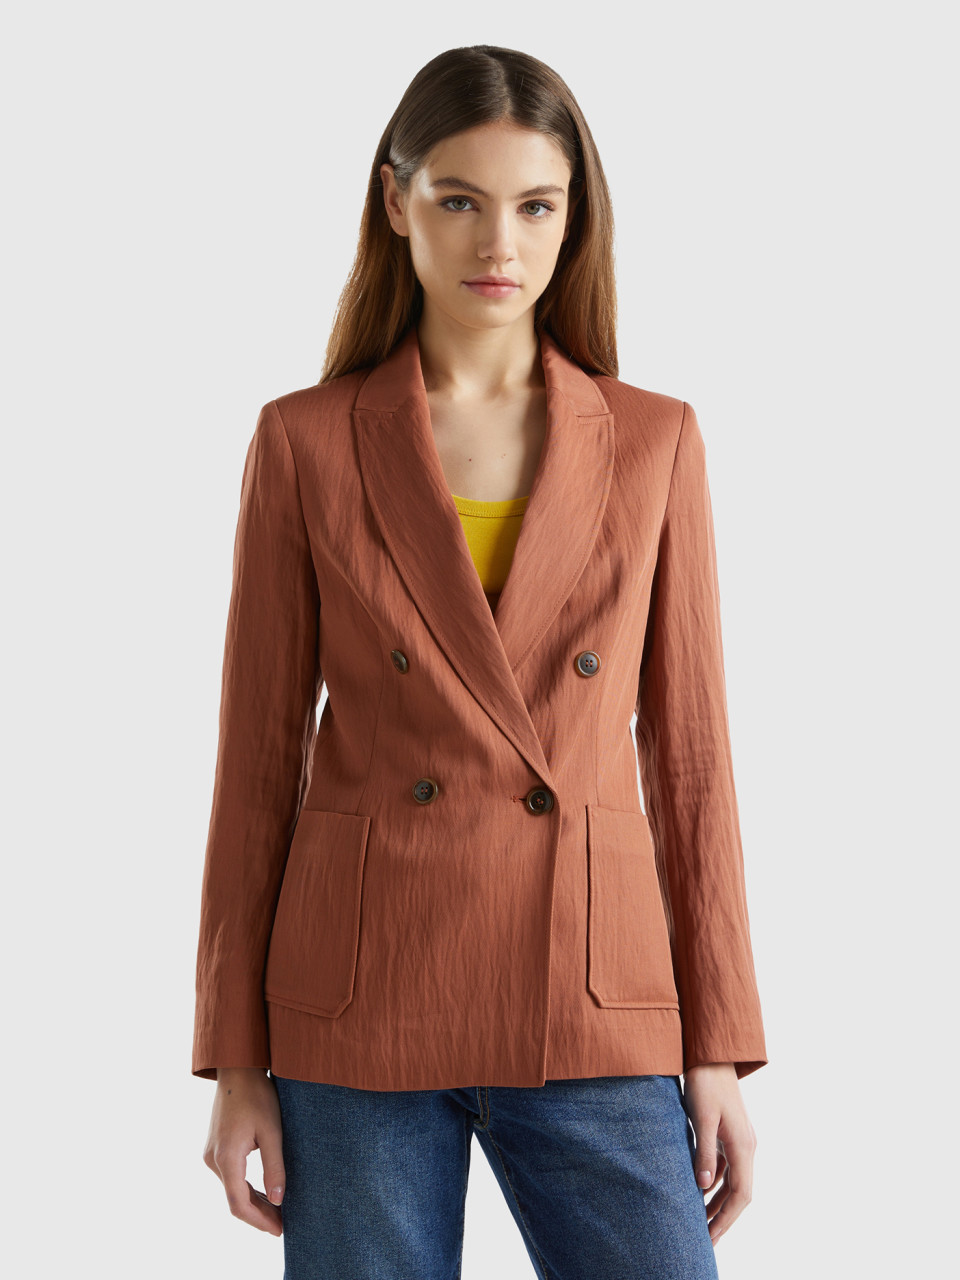 Benetton, Double-breasted Blazer In Sustainable Viscose Blend, Brown, Women